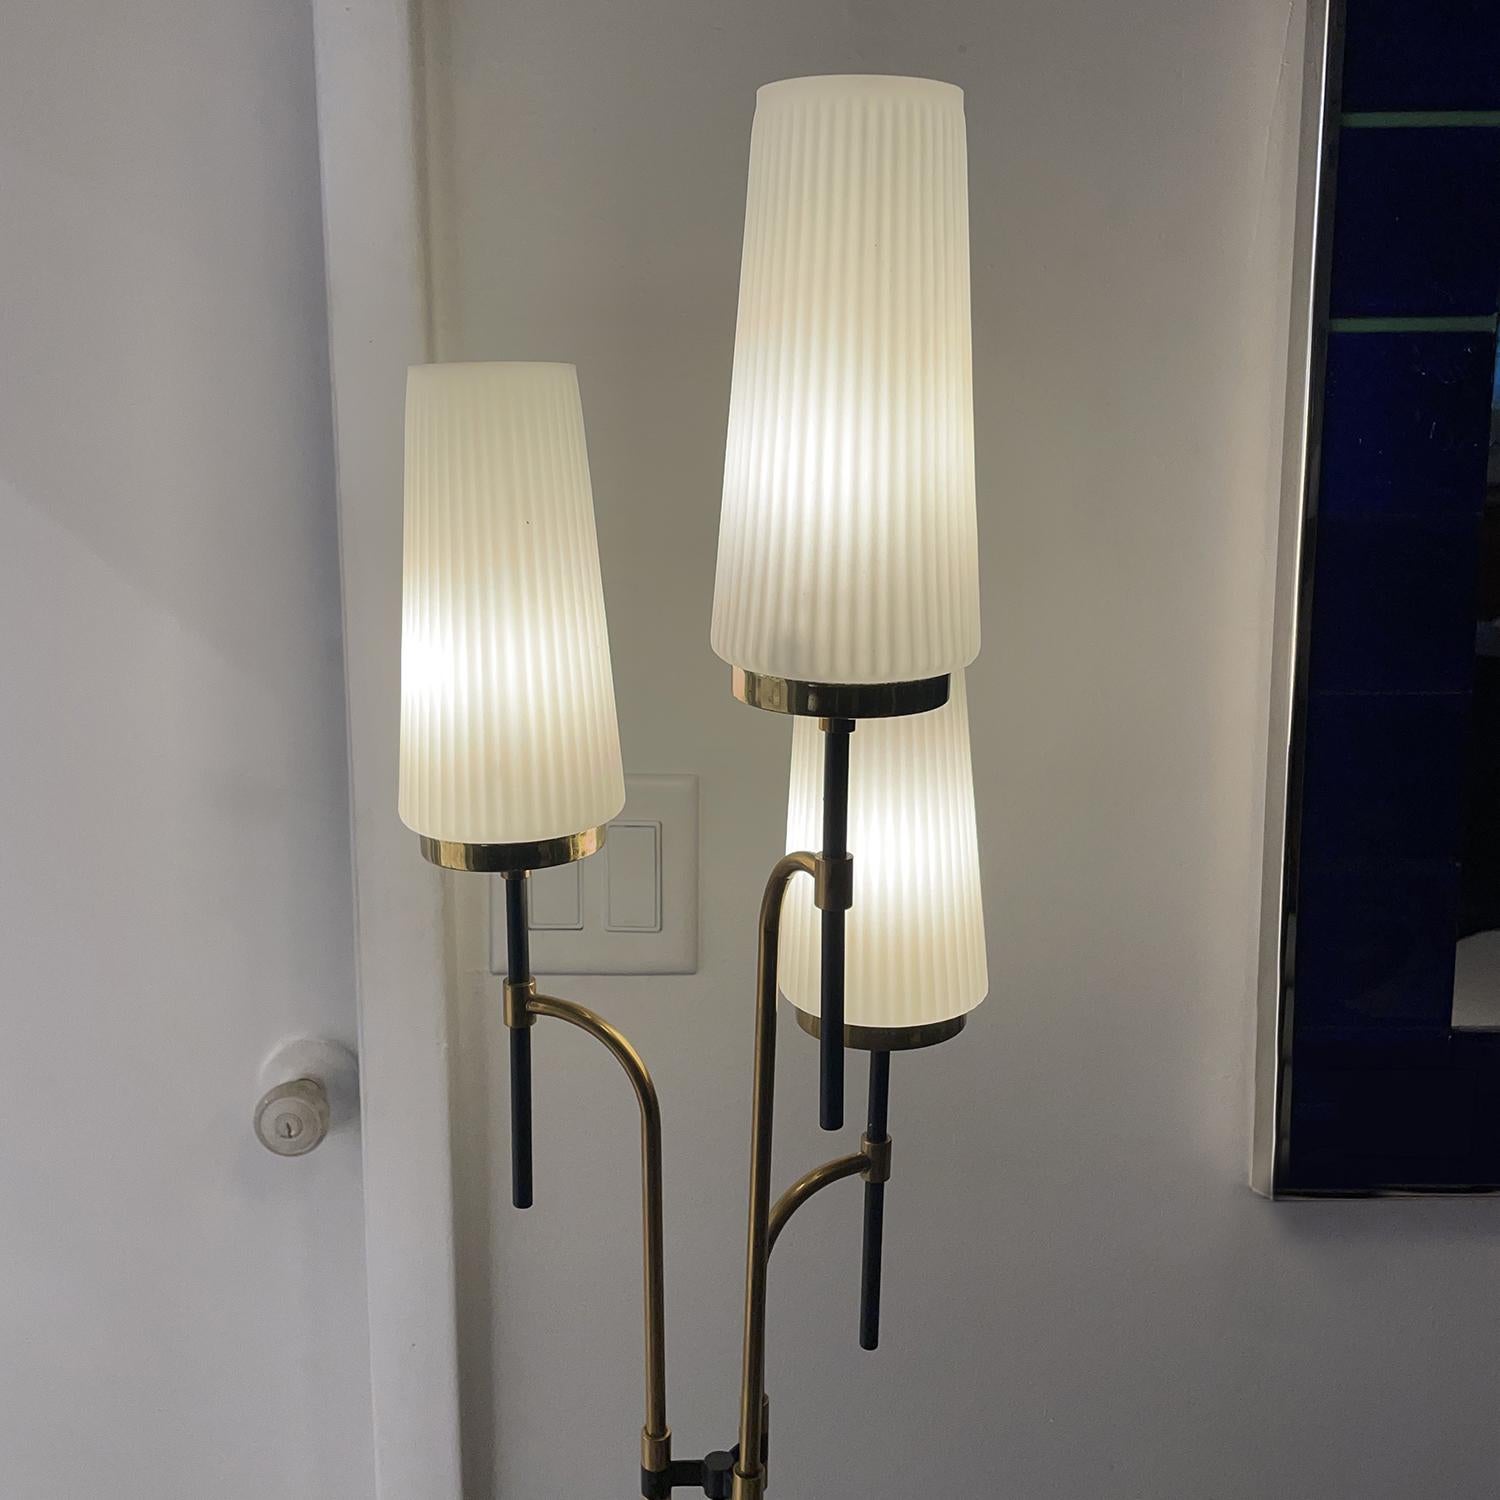 20th Century Italian Frosted Opaline Glass Floor Lamp Attributed to Stilnovo For Sale 2